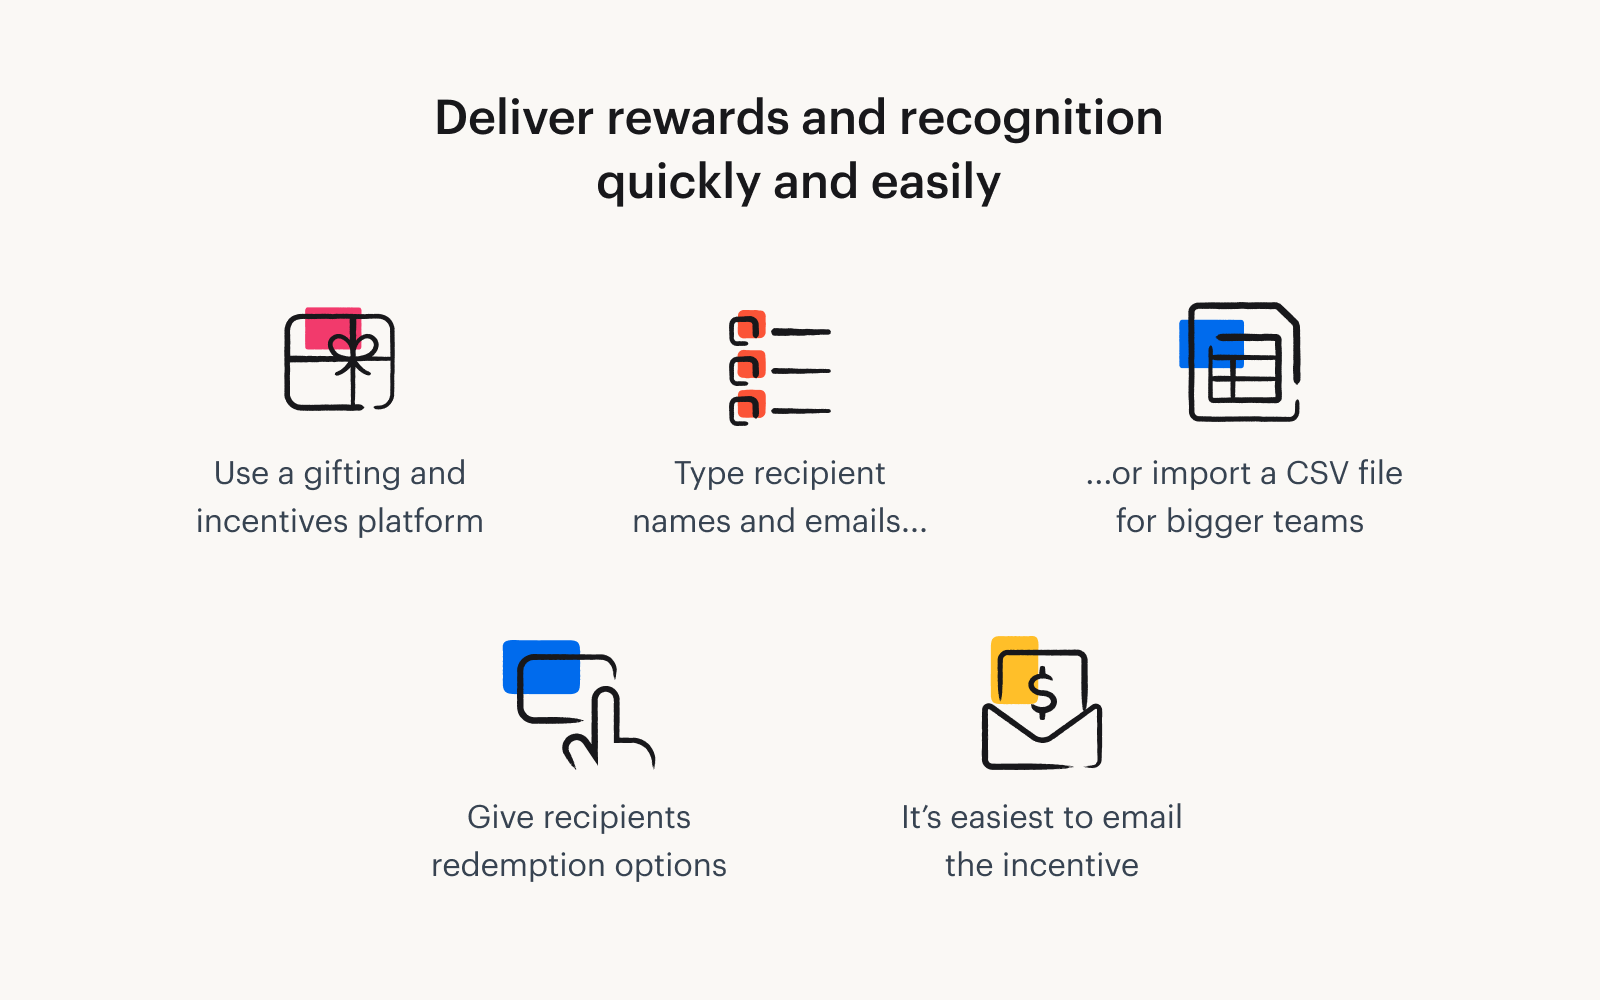 Text reads: "Deliver rewards and recognition quickly and easily." Then, small logos spell out how to do so. The steps include using a gifting and incentives platform, typing recipient names and emails, importing a CSV file, giving recipients redemption options, and emailing the incentive.